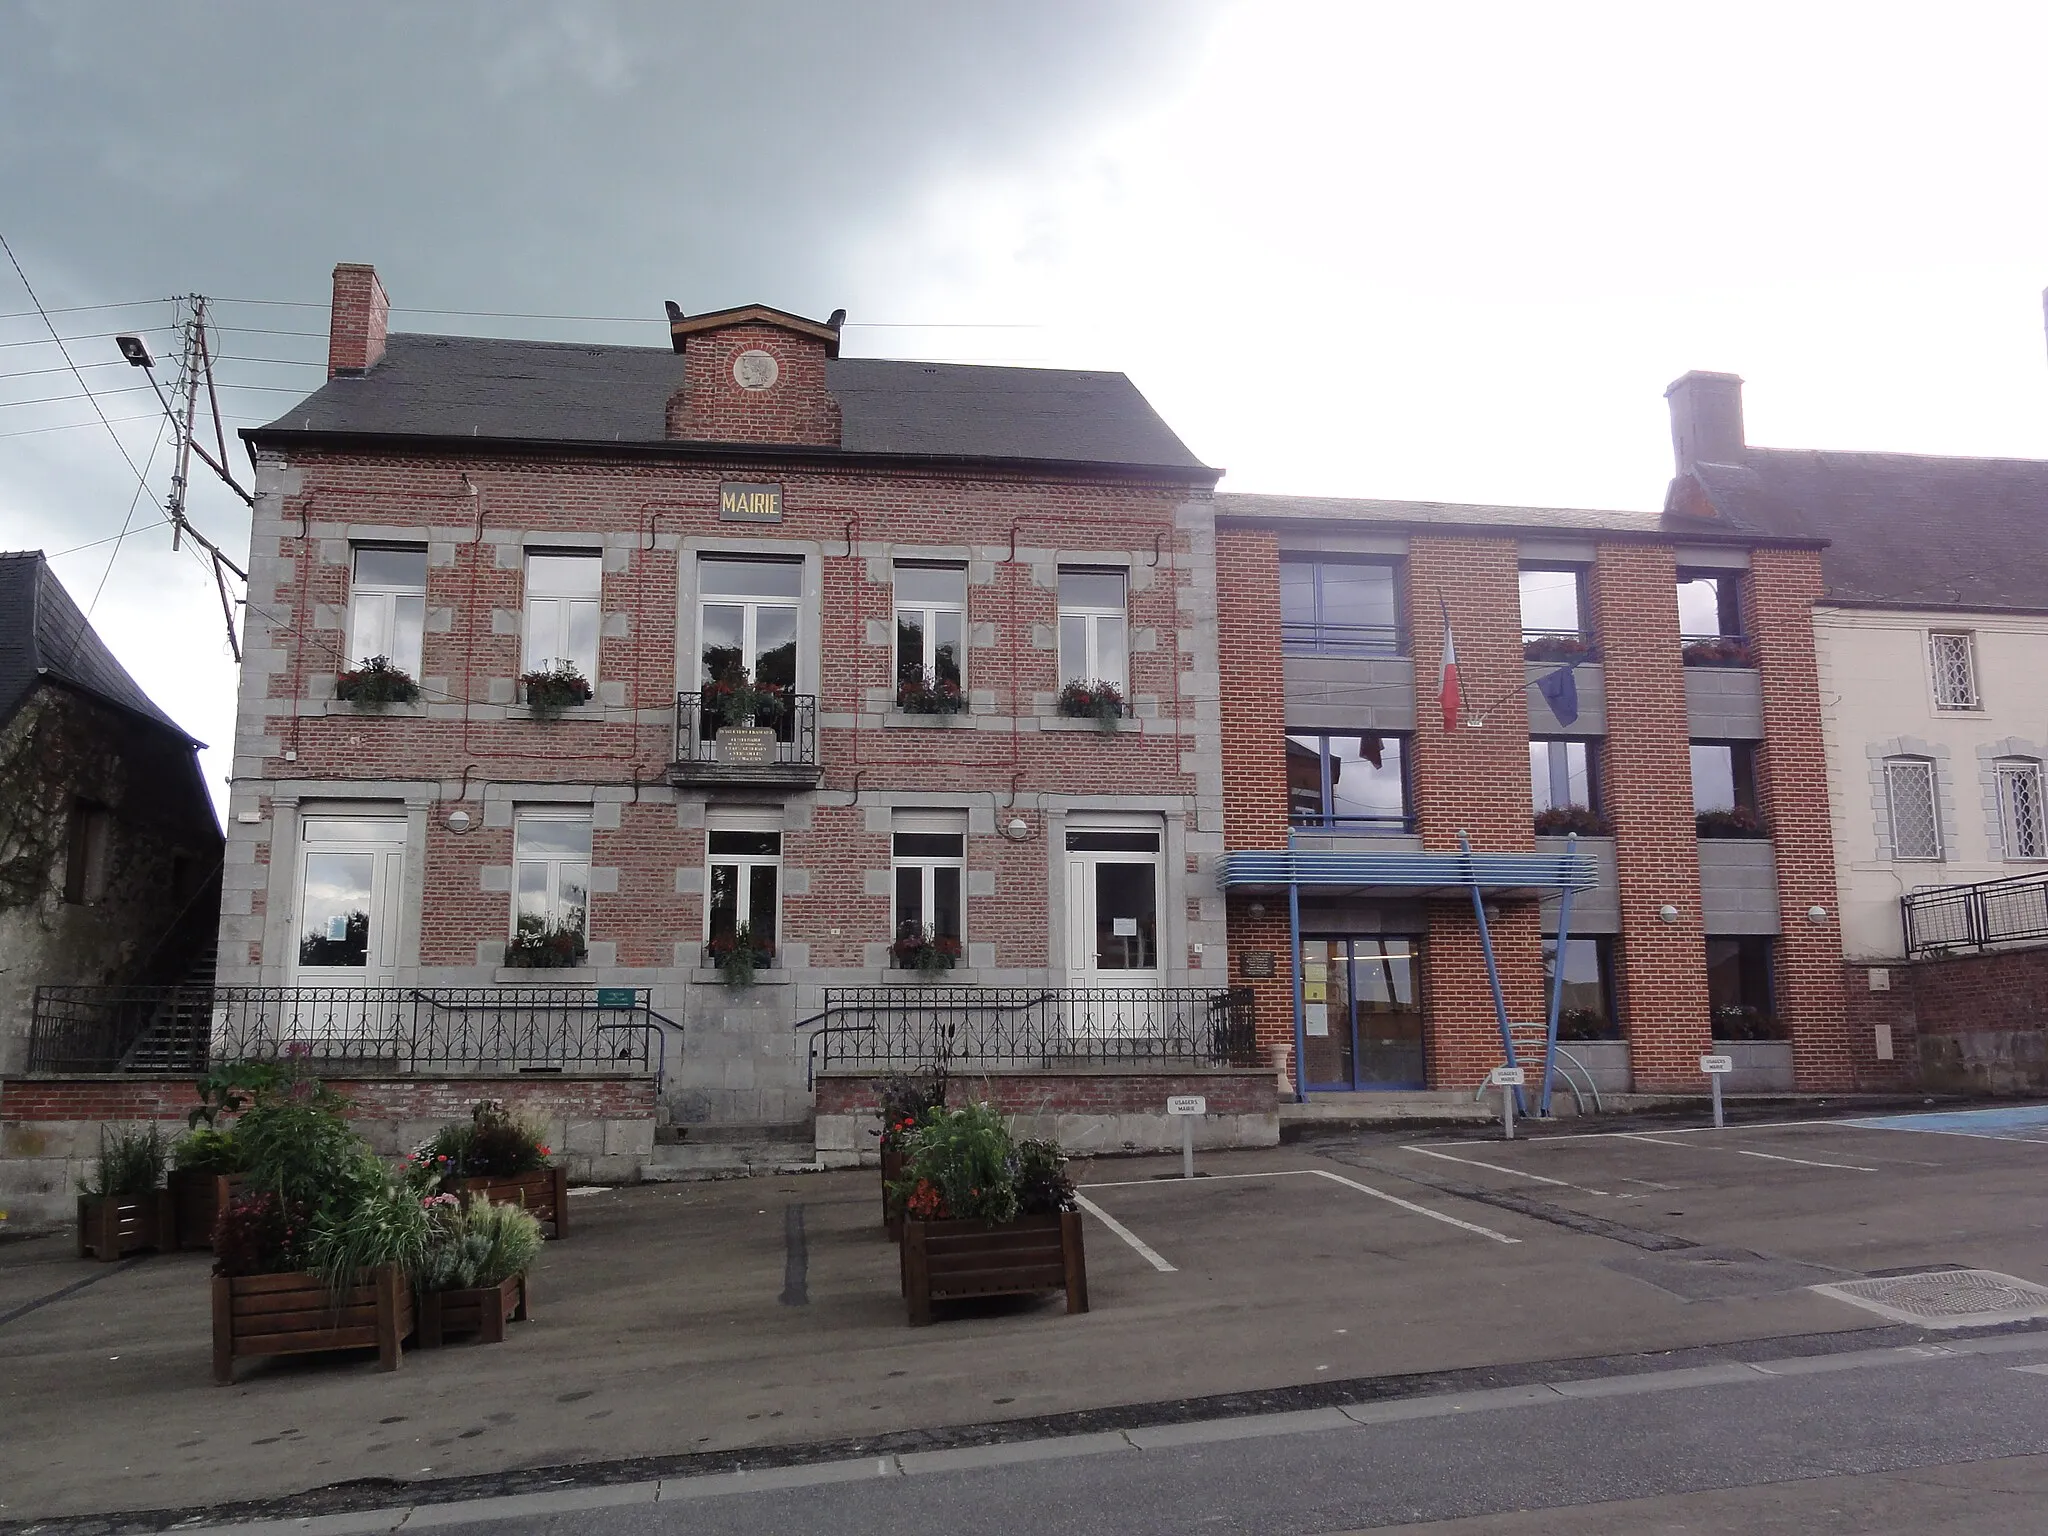 Photo showing: Sains-du-Nord (France - Nord department) – The town hall.